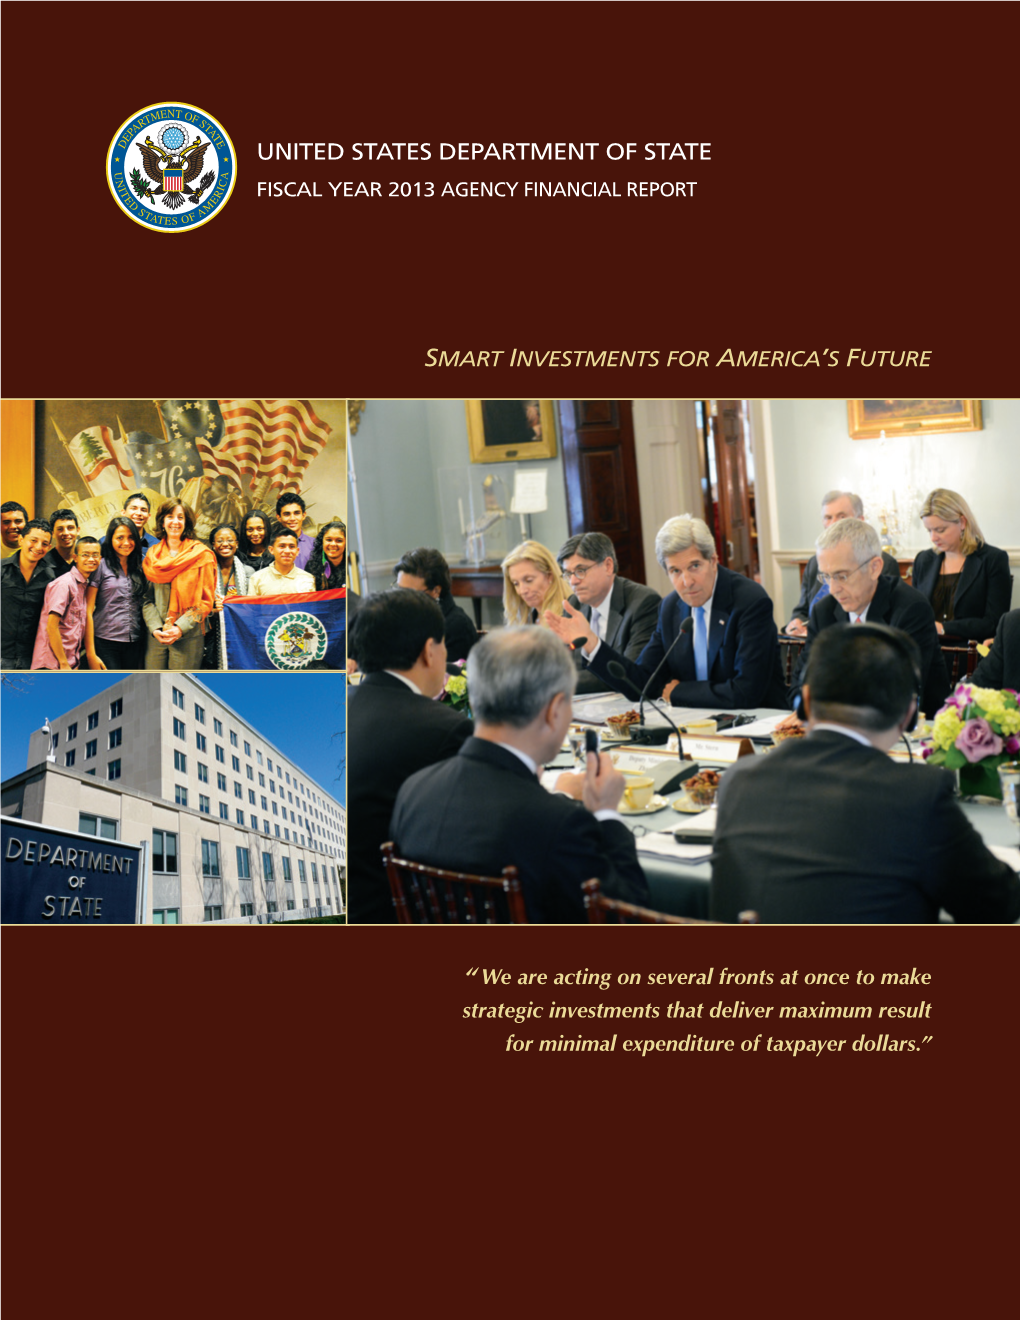 U.S. Department of State Fiscal Year 2013 Agency Financial Report